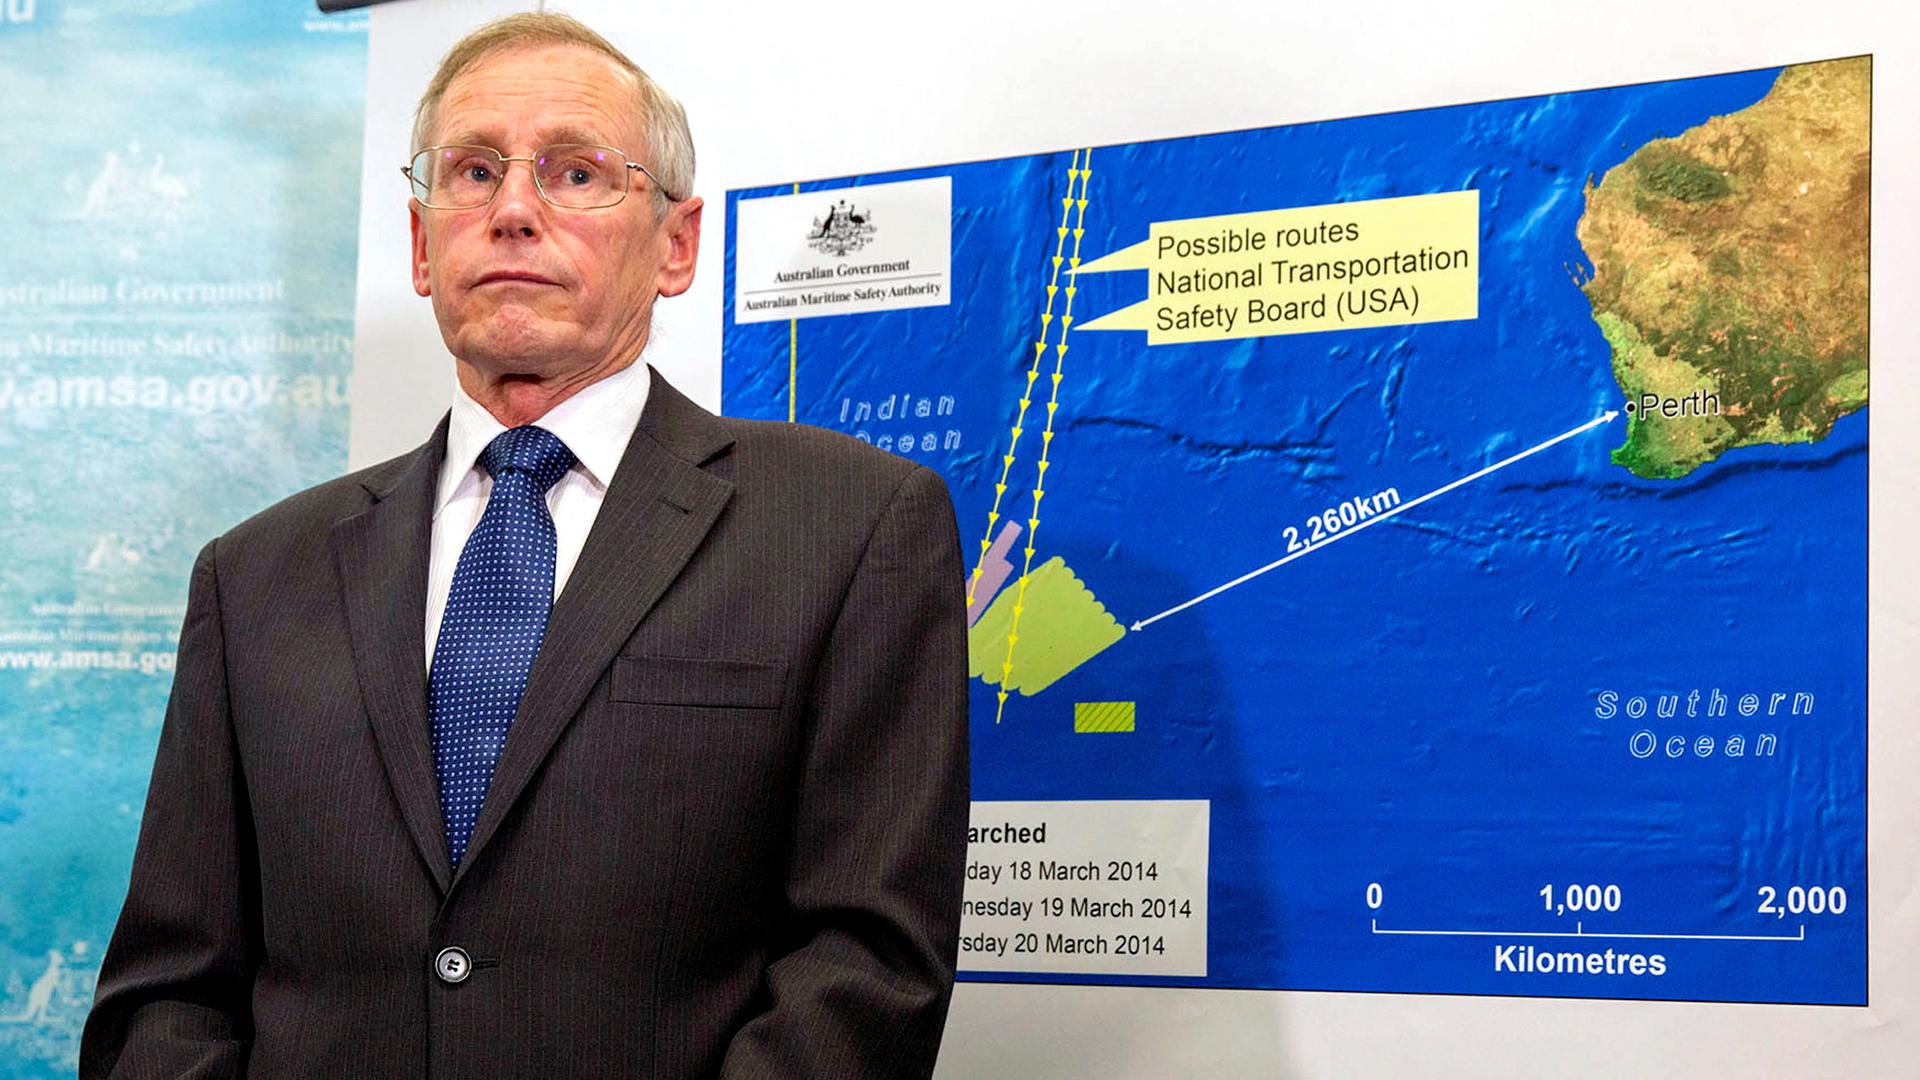 John Young, general manager of the emergency response division of the Australian Maritime Safety Authority (AMSA), stands in front of a diagram showing the search area for Malaysia Airlines Flight MH370 in the southern Indian Ocean, during a briefing in C